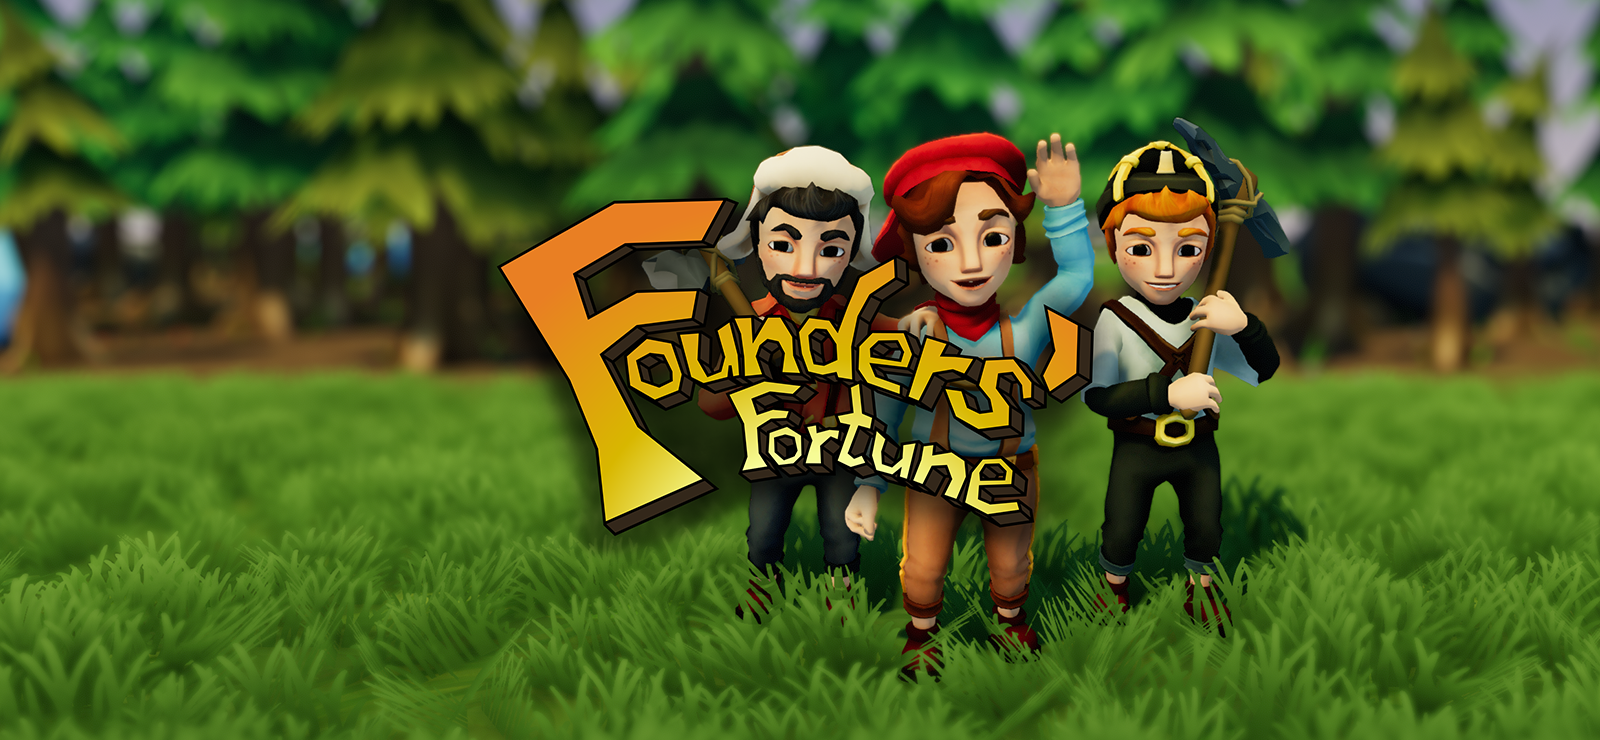 Boxart for Founders' Fortune